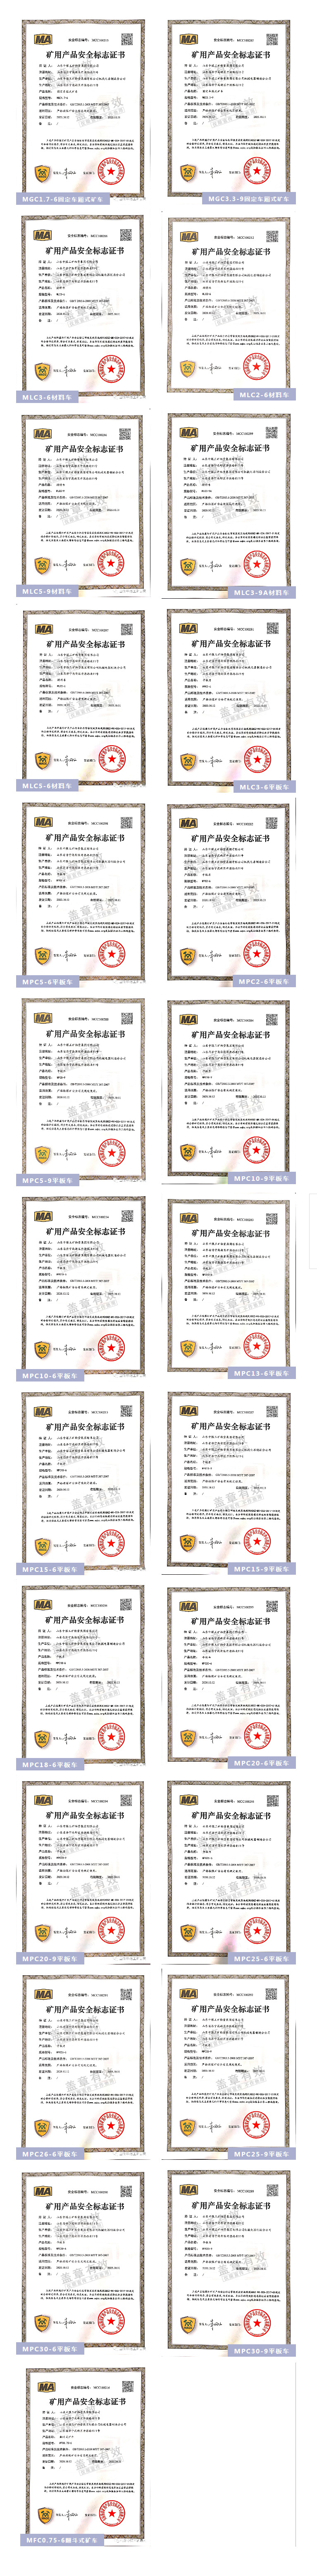 Congratulations To The 25 Mining Products Of Shandong Lvbei For Successfully Passing The Review Of The National Mining Product Safety Mark Center